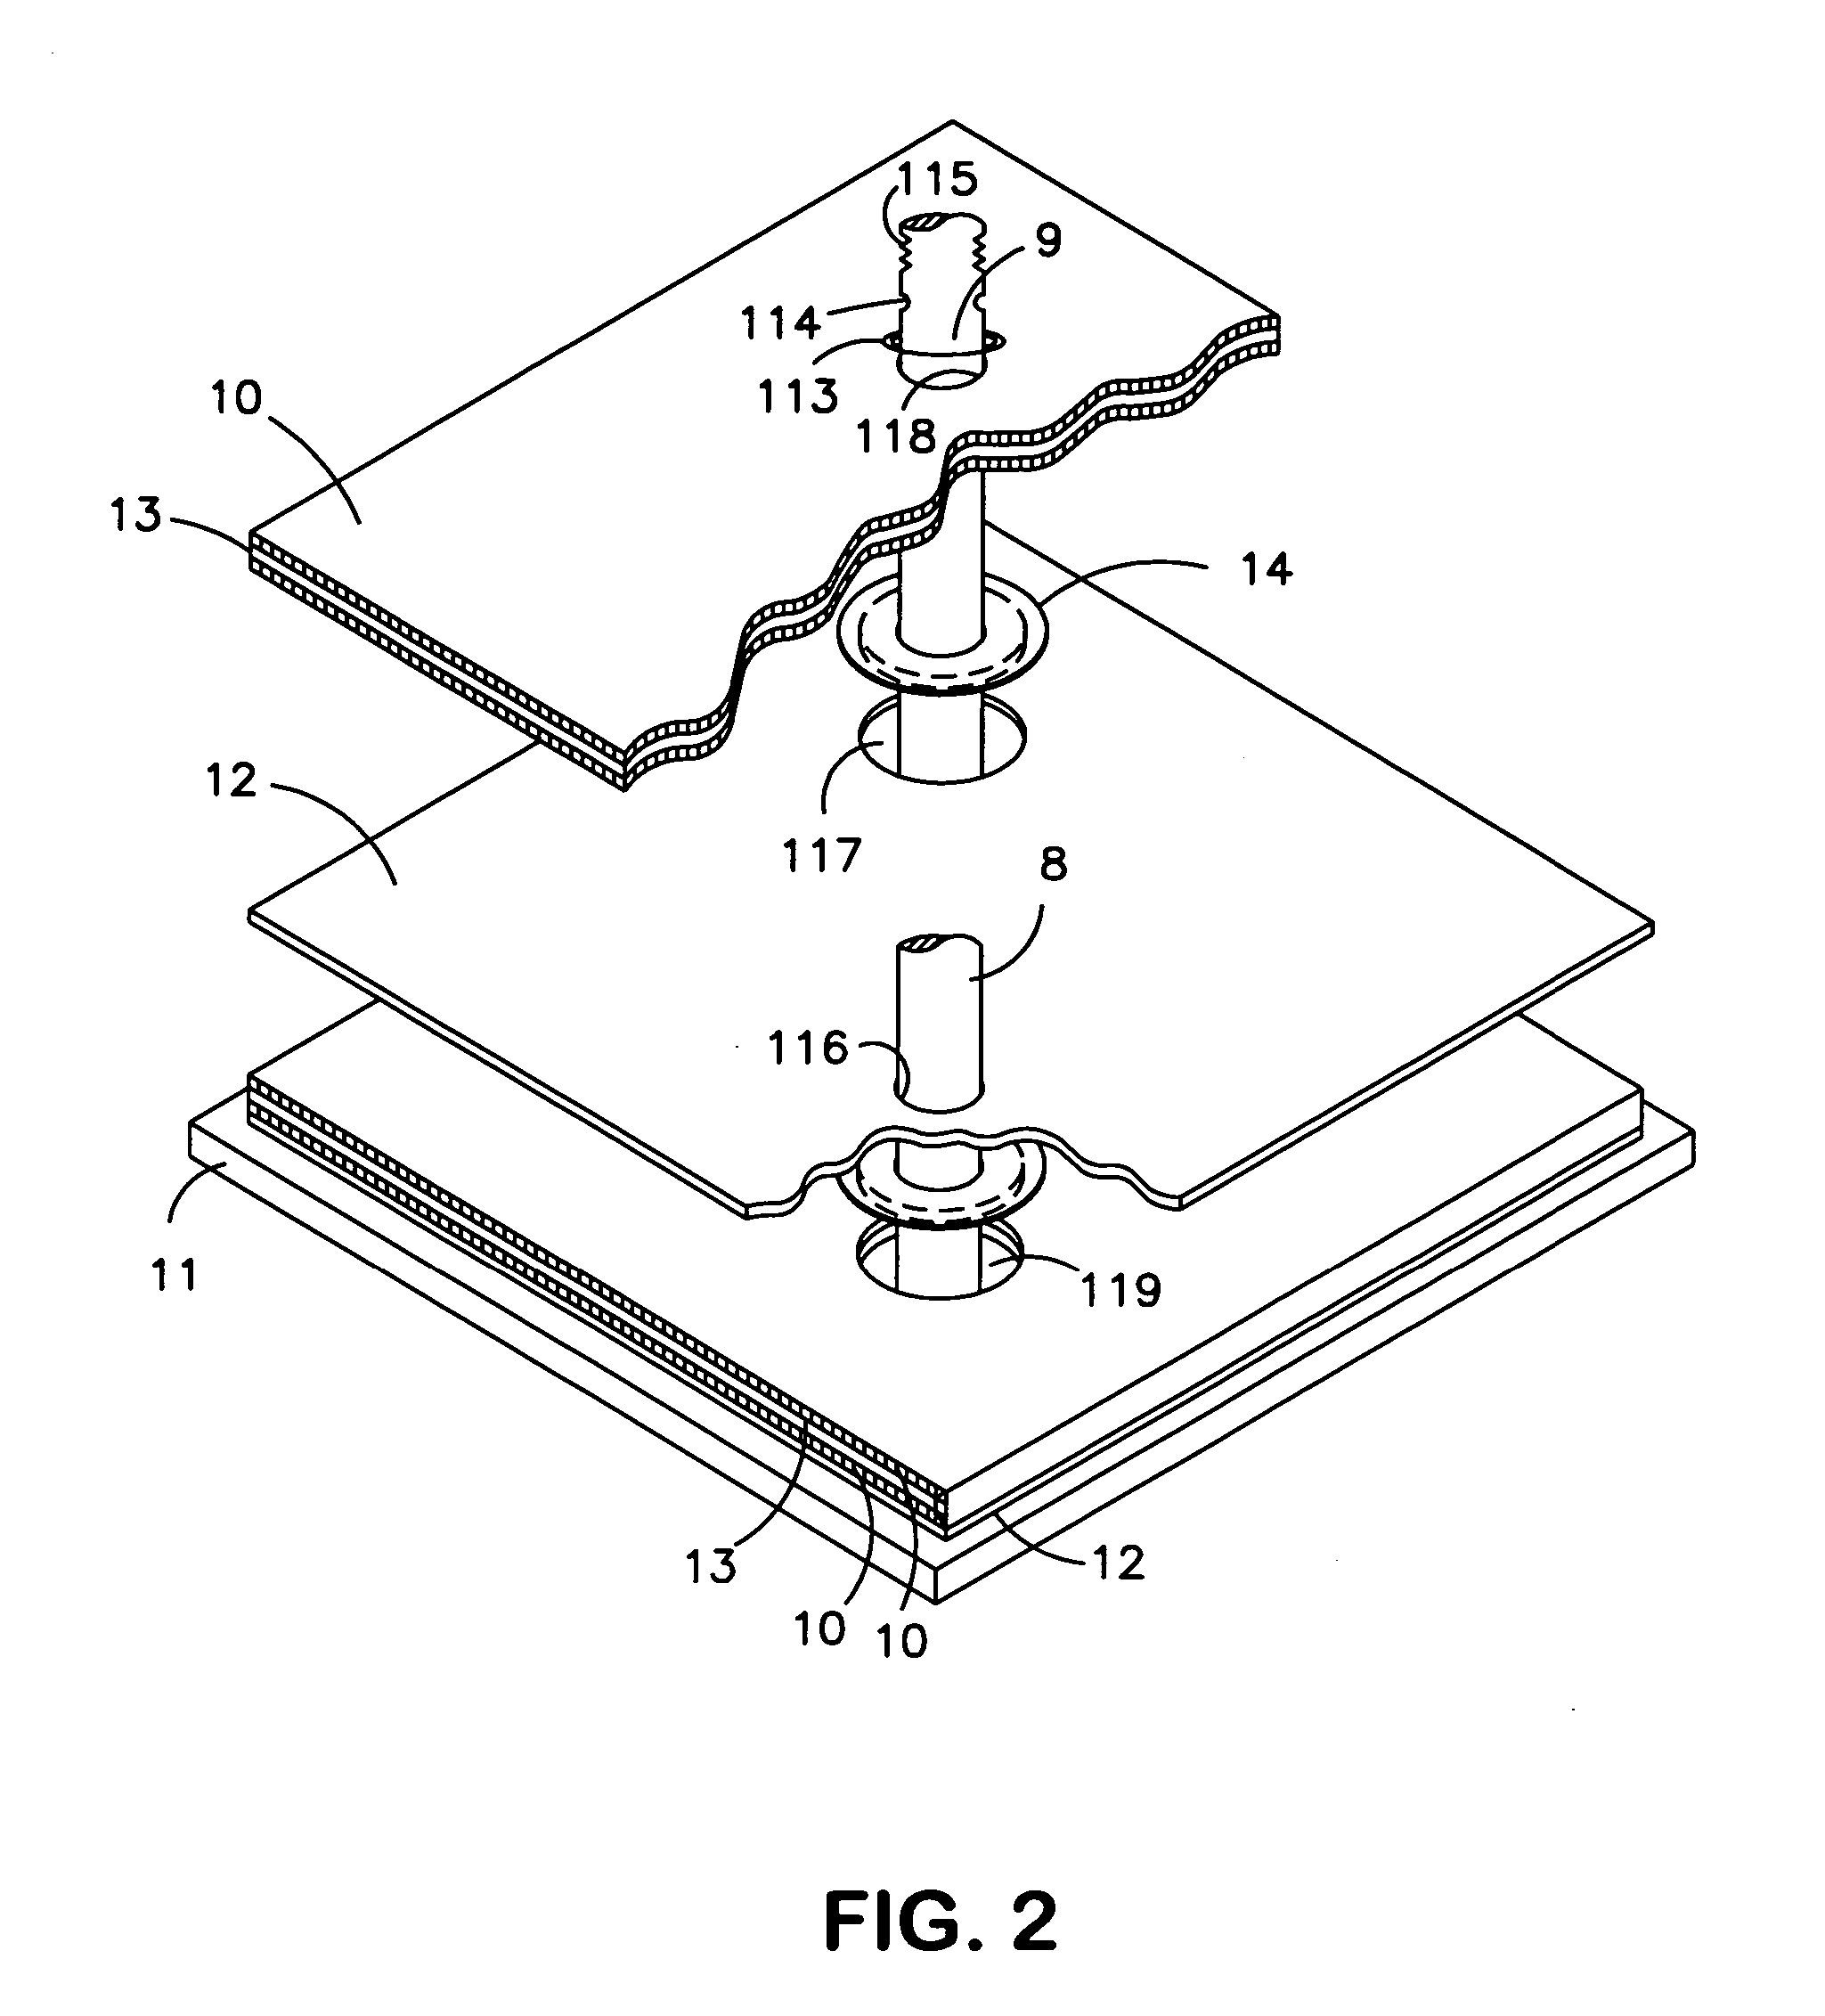 Battery electrode design and a flat stack battery cell design and methods of making same